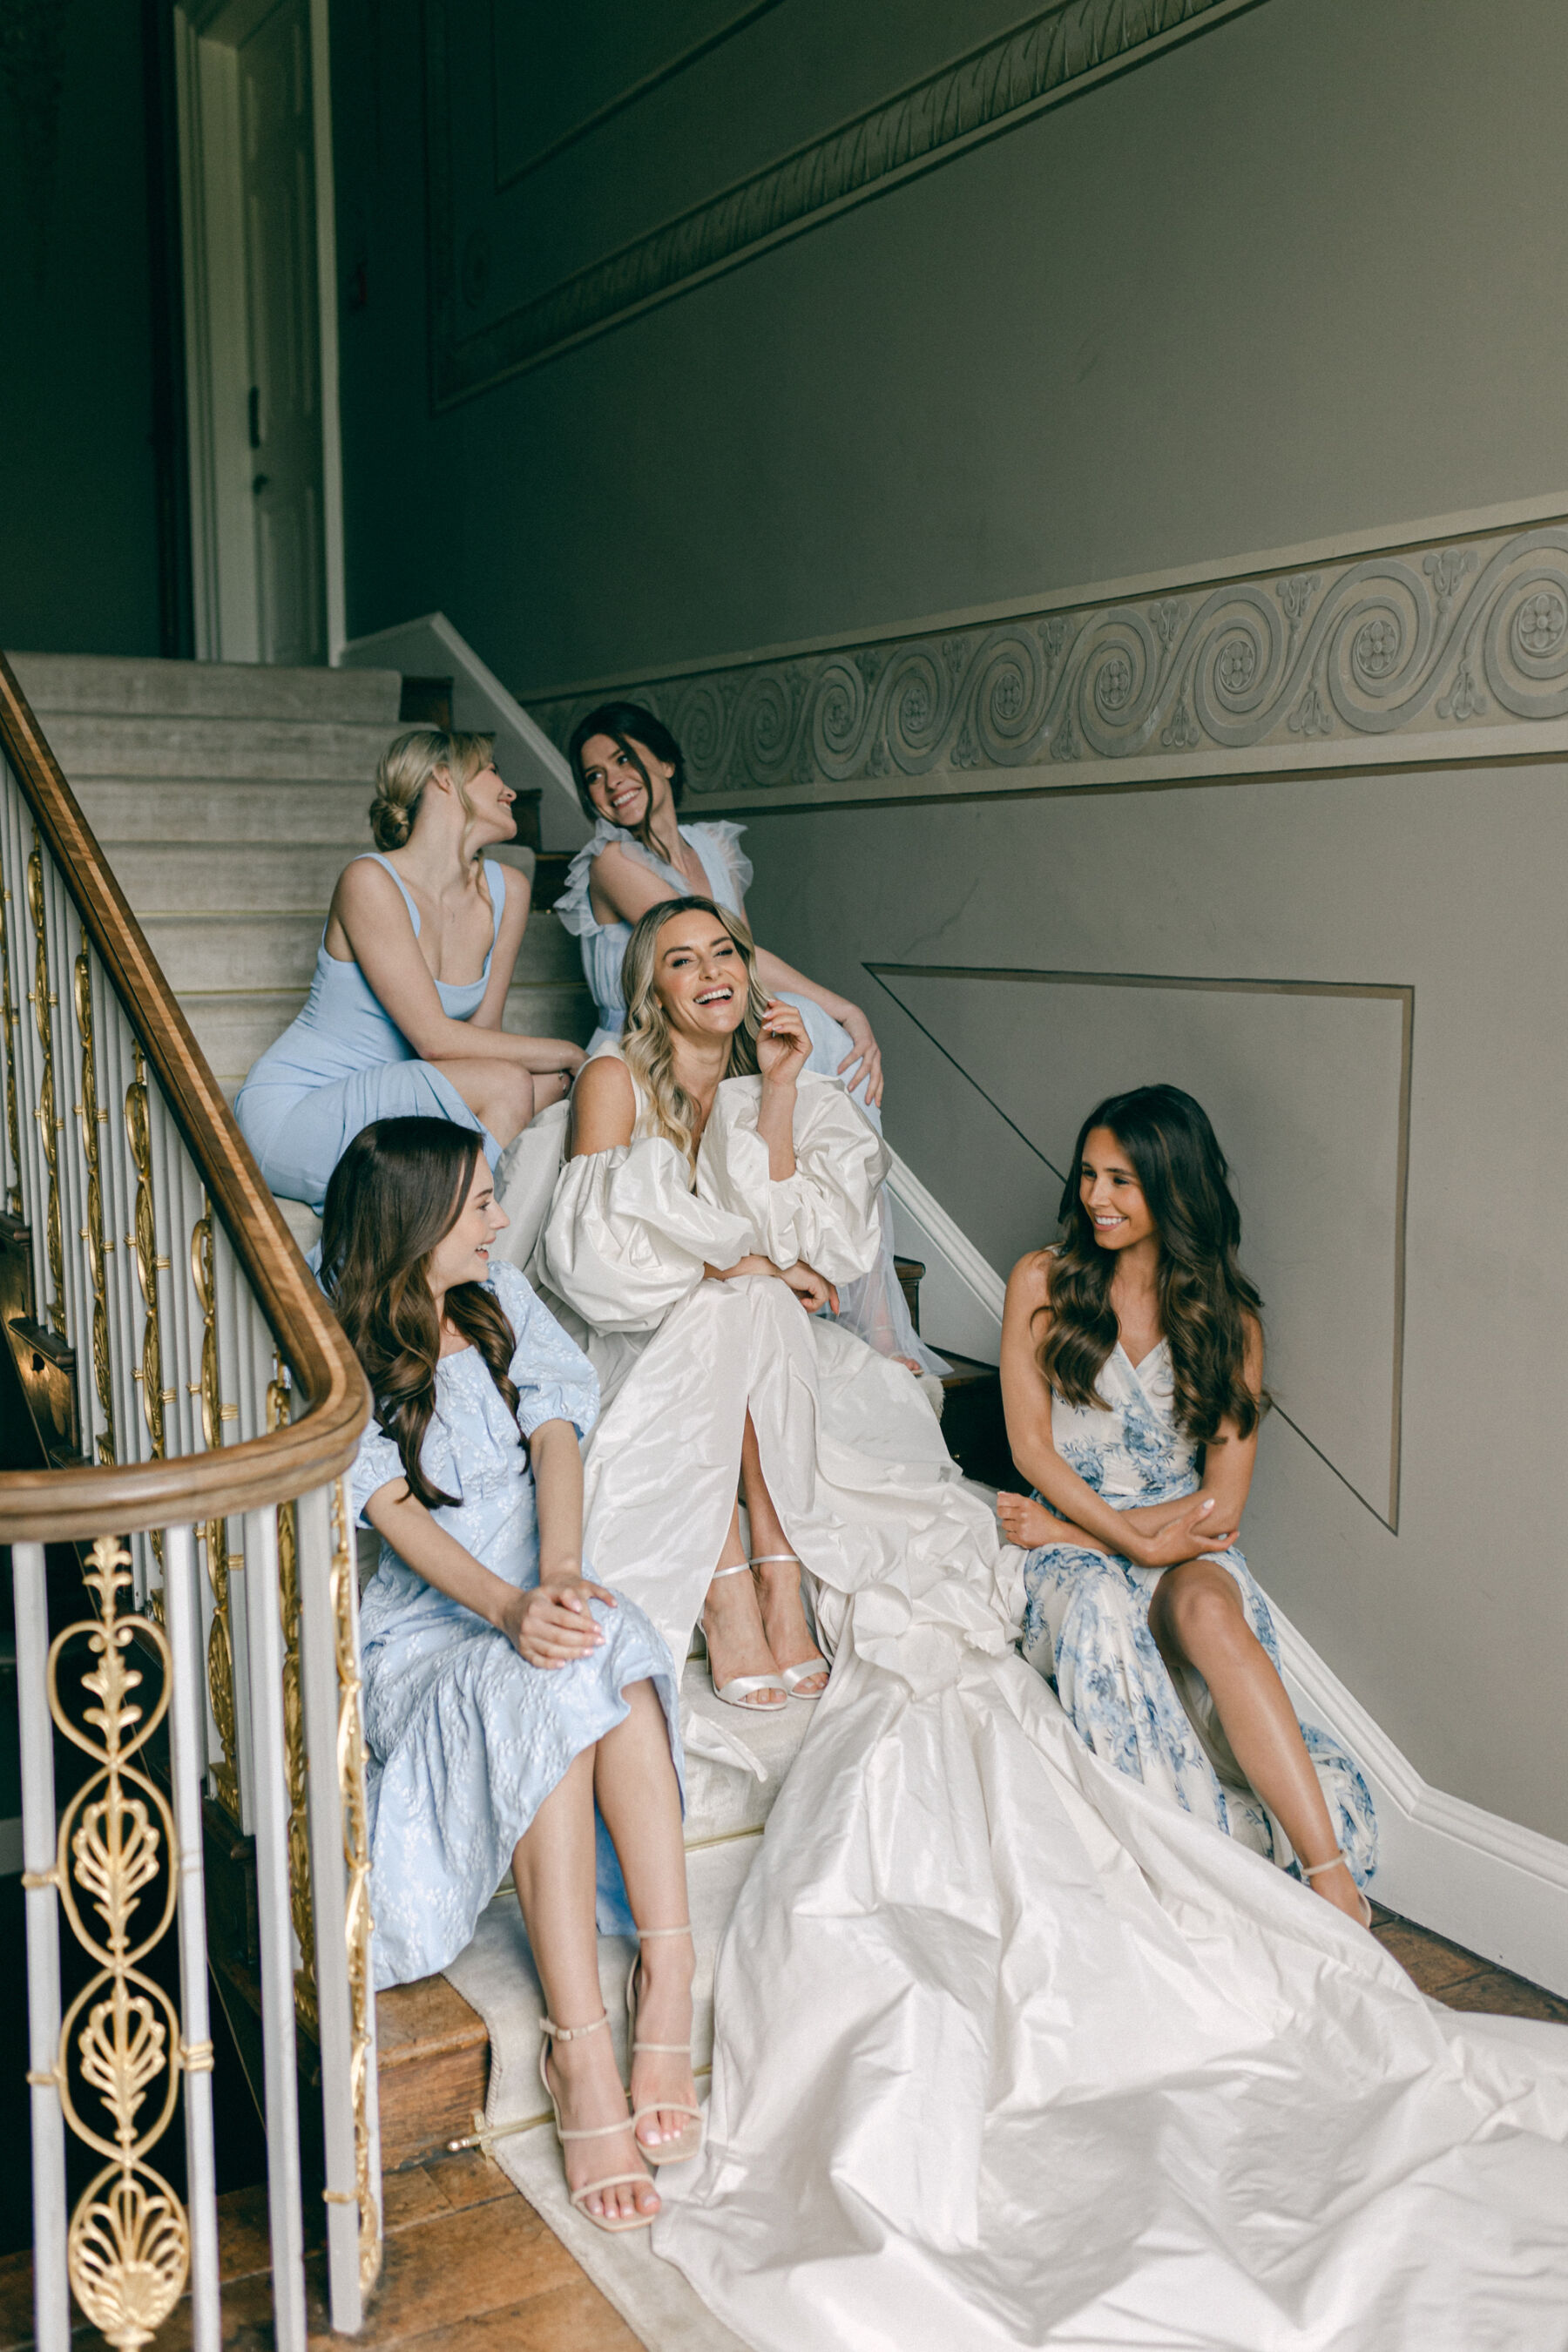 Bride and bridesmaids sat on the sweeping staircase at Avington Park, laughing and jolly. The bride wears a Halfpenny London bridal gown full of fashion drama and the bridesmaids wear pale blue dresses.